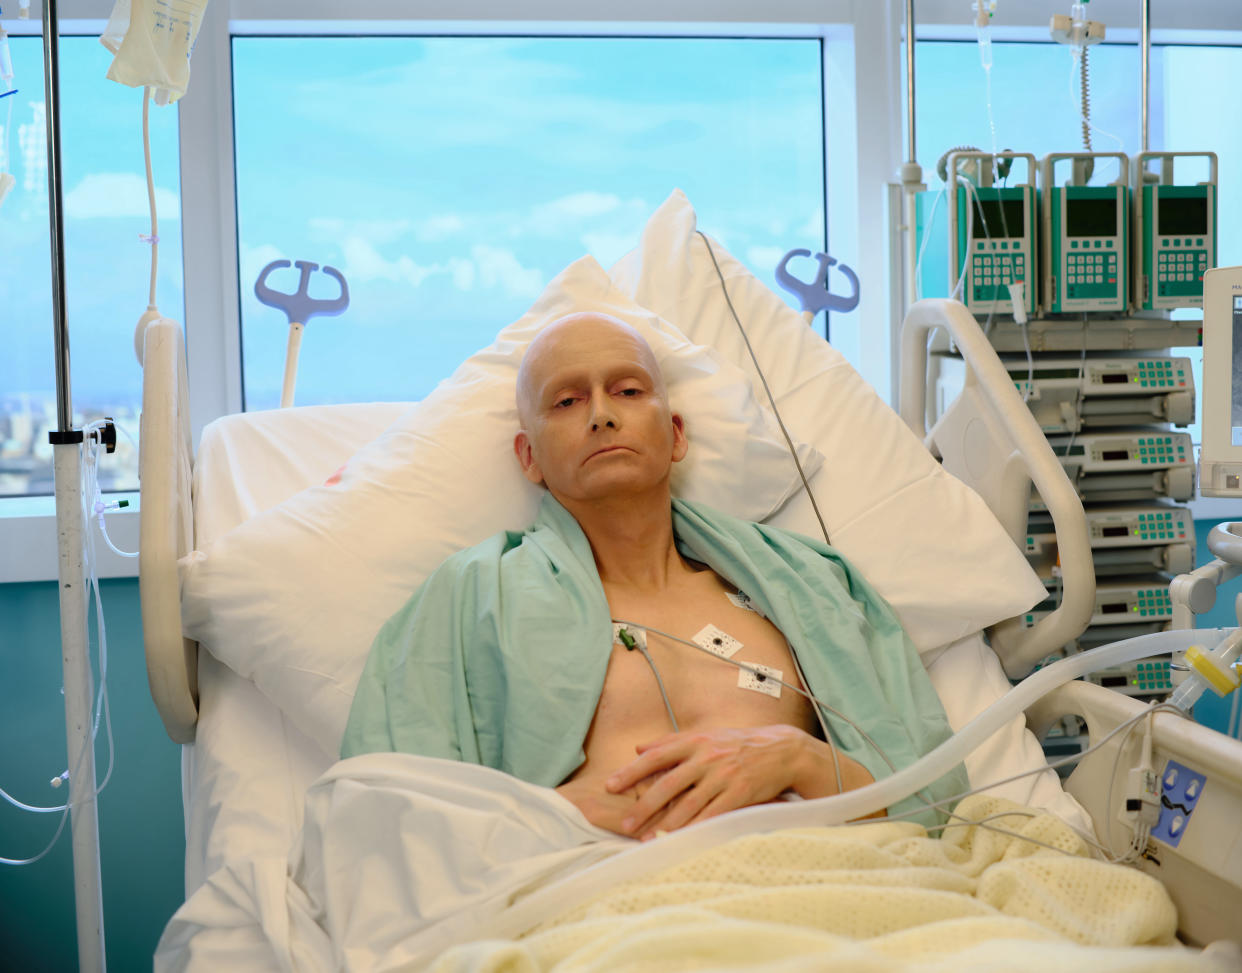 ITV STUDIOS FOR
ITVX

Pictured:DAVID TENNANT AS ALEXANDER LITVINENKO.

This image is under copyright and can only be reproduced for editorial purposes in your print or online publication. This image cannot be syndicated to any other third party.
COPYRIGHT ITVX



